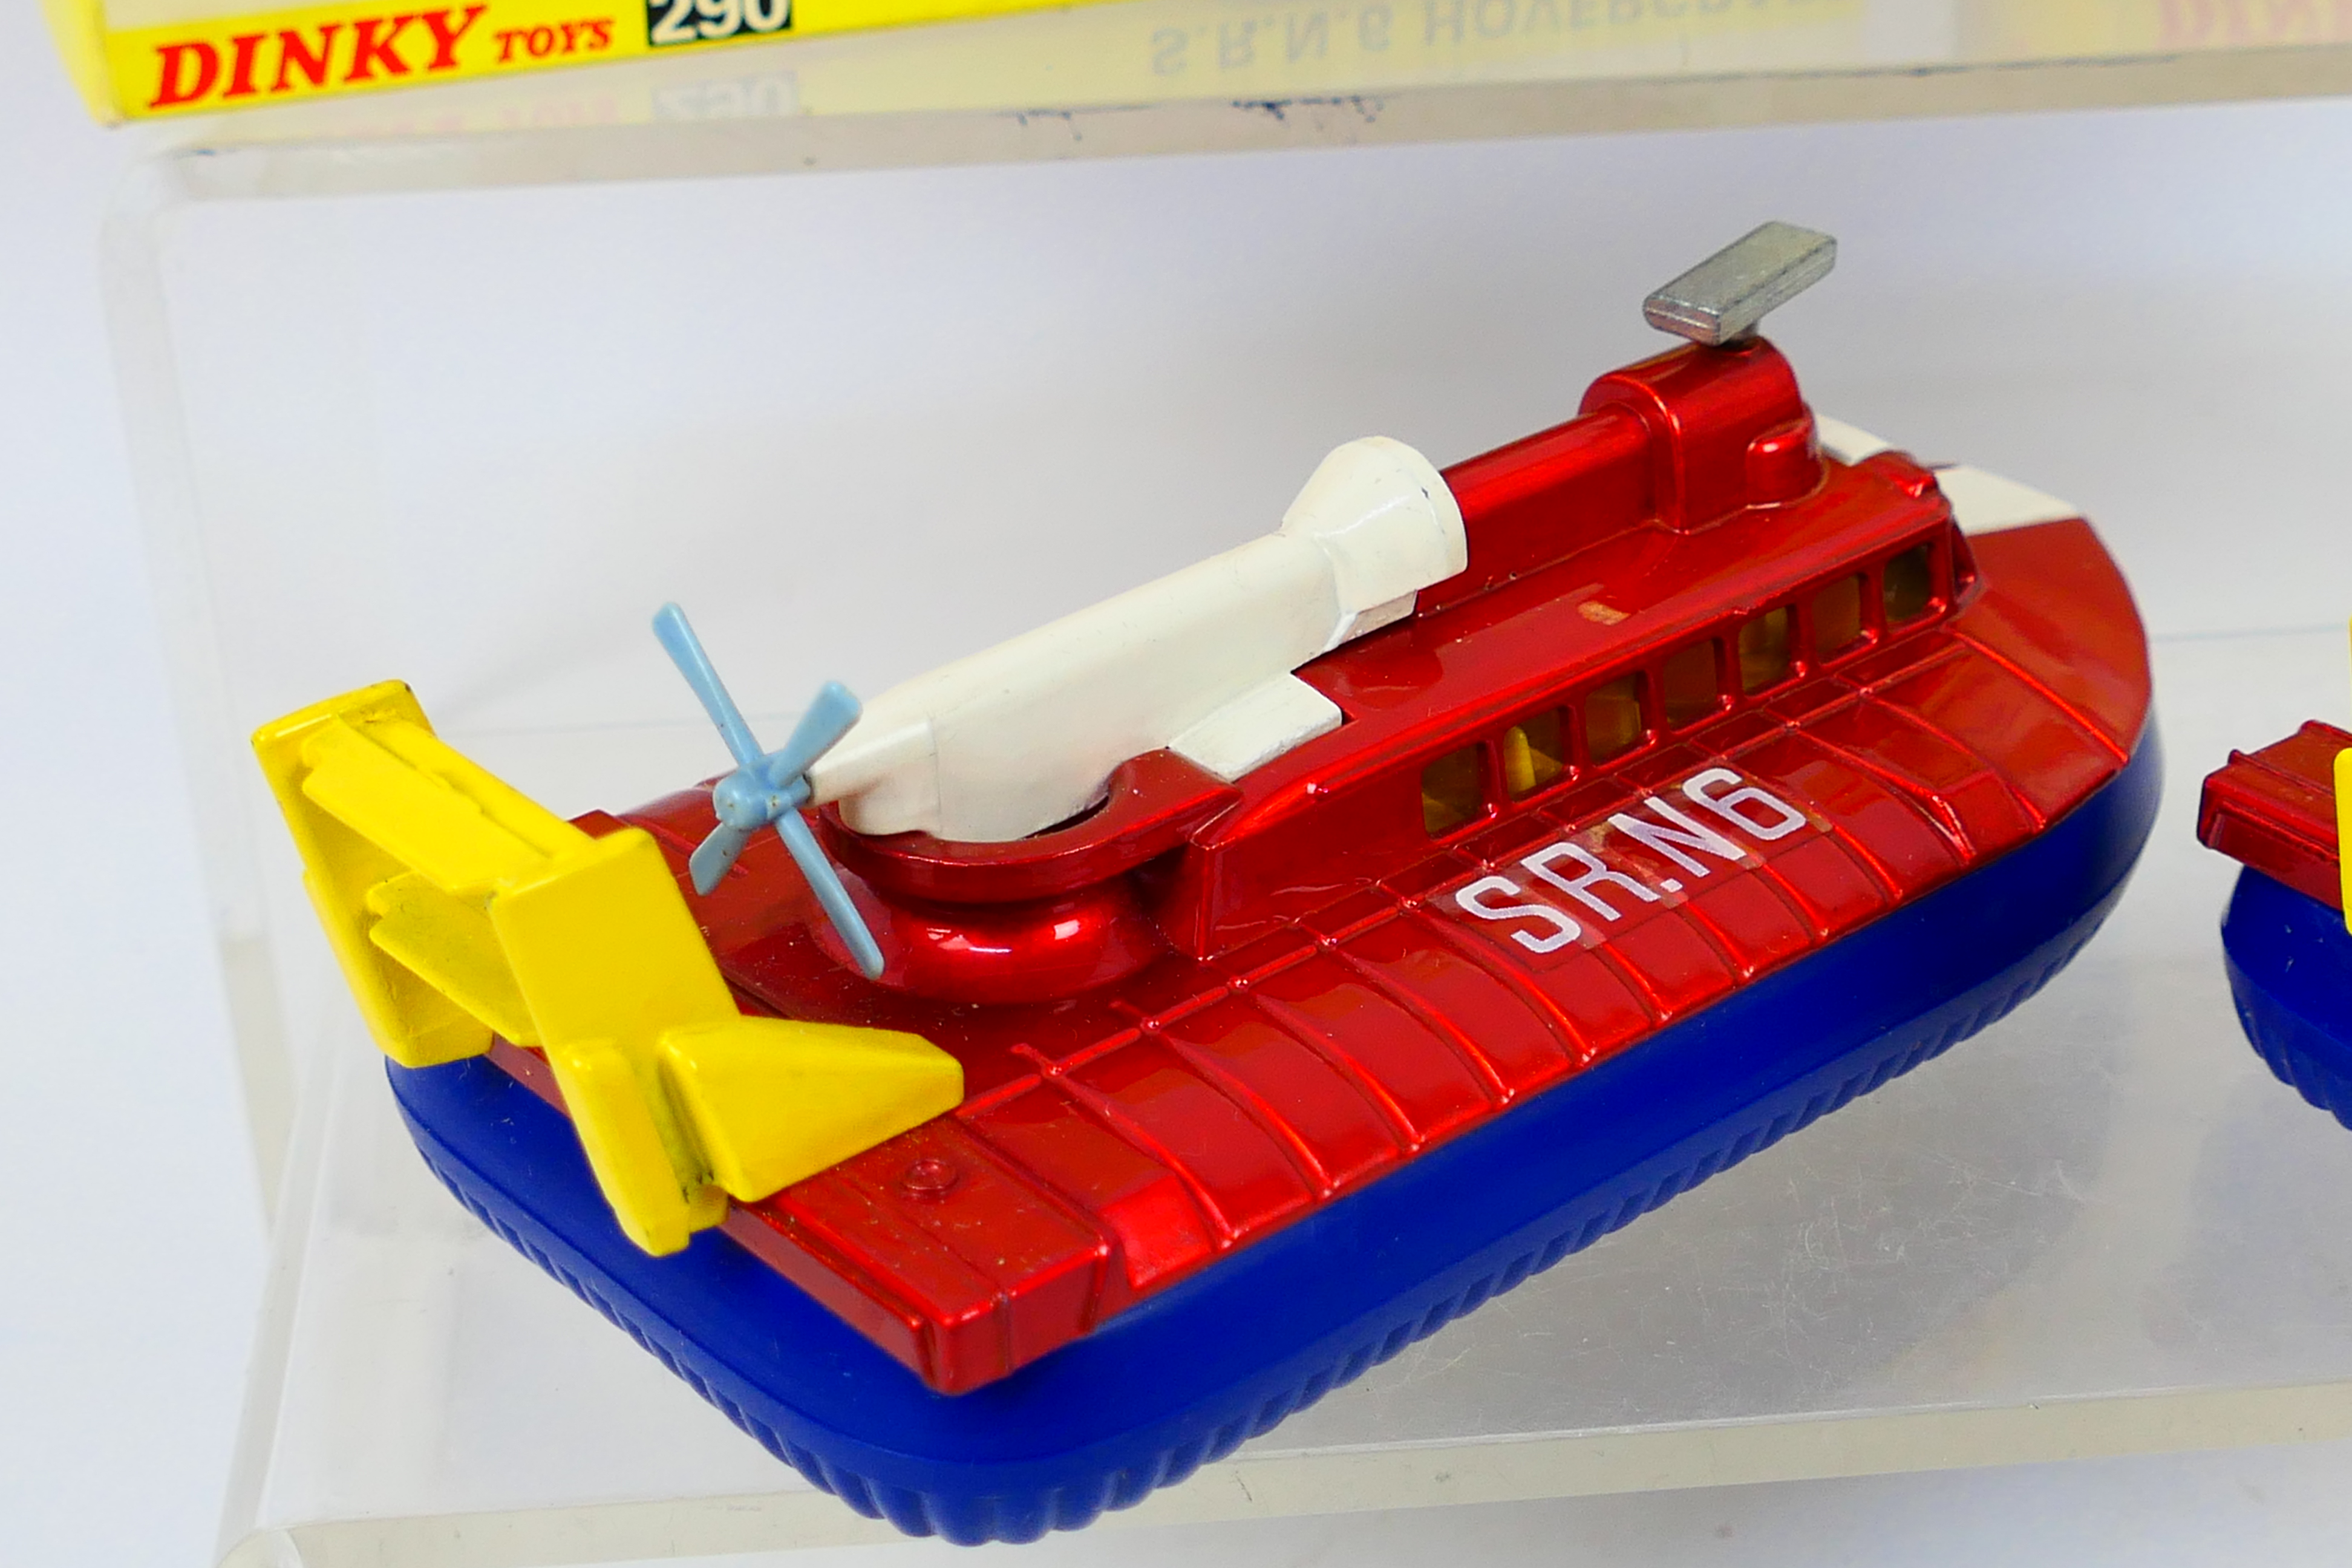 Dinky - 2 x boxed S.R.N.6 hovercraft models # 290. - Image 4 of 11